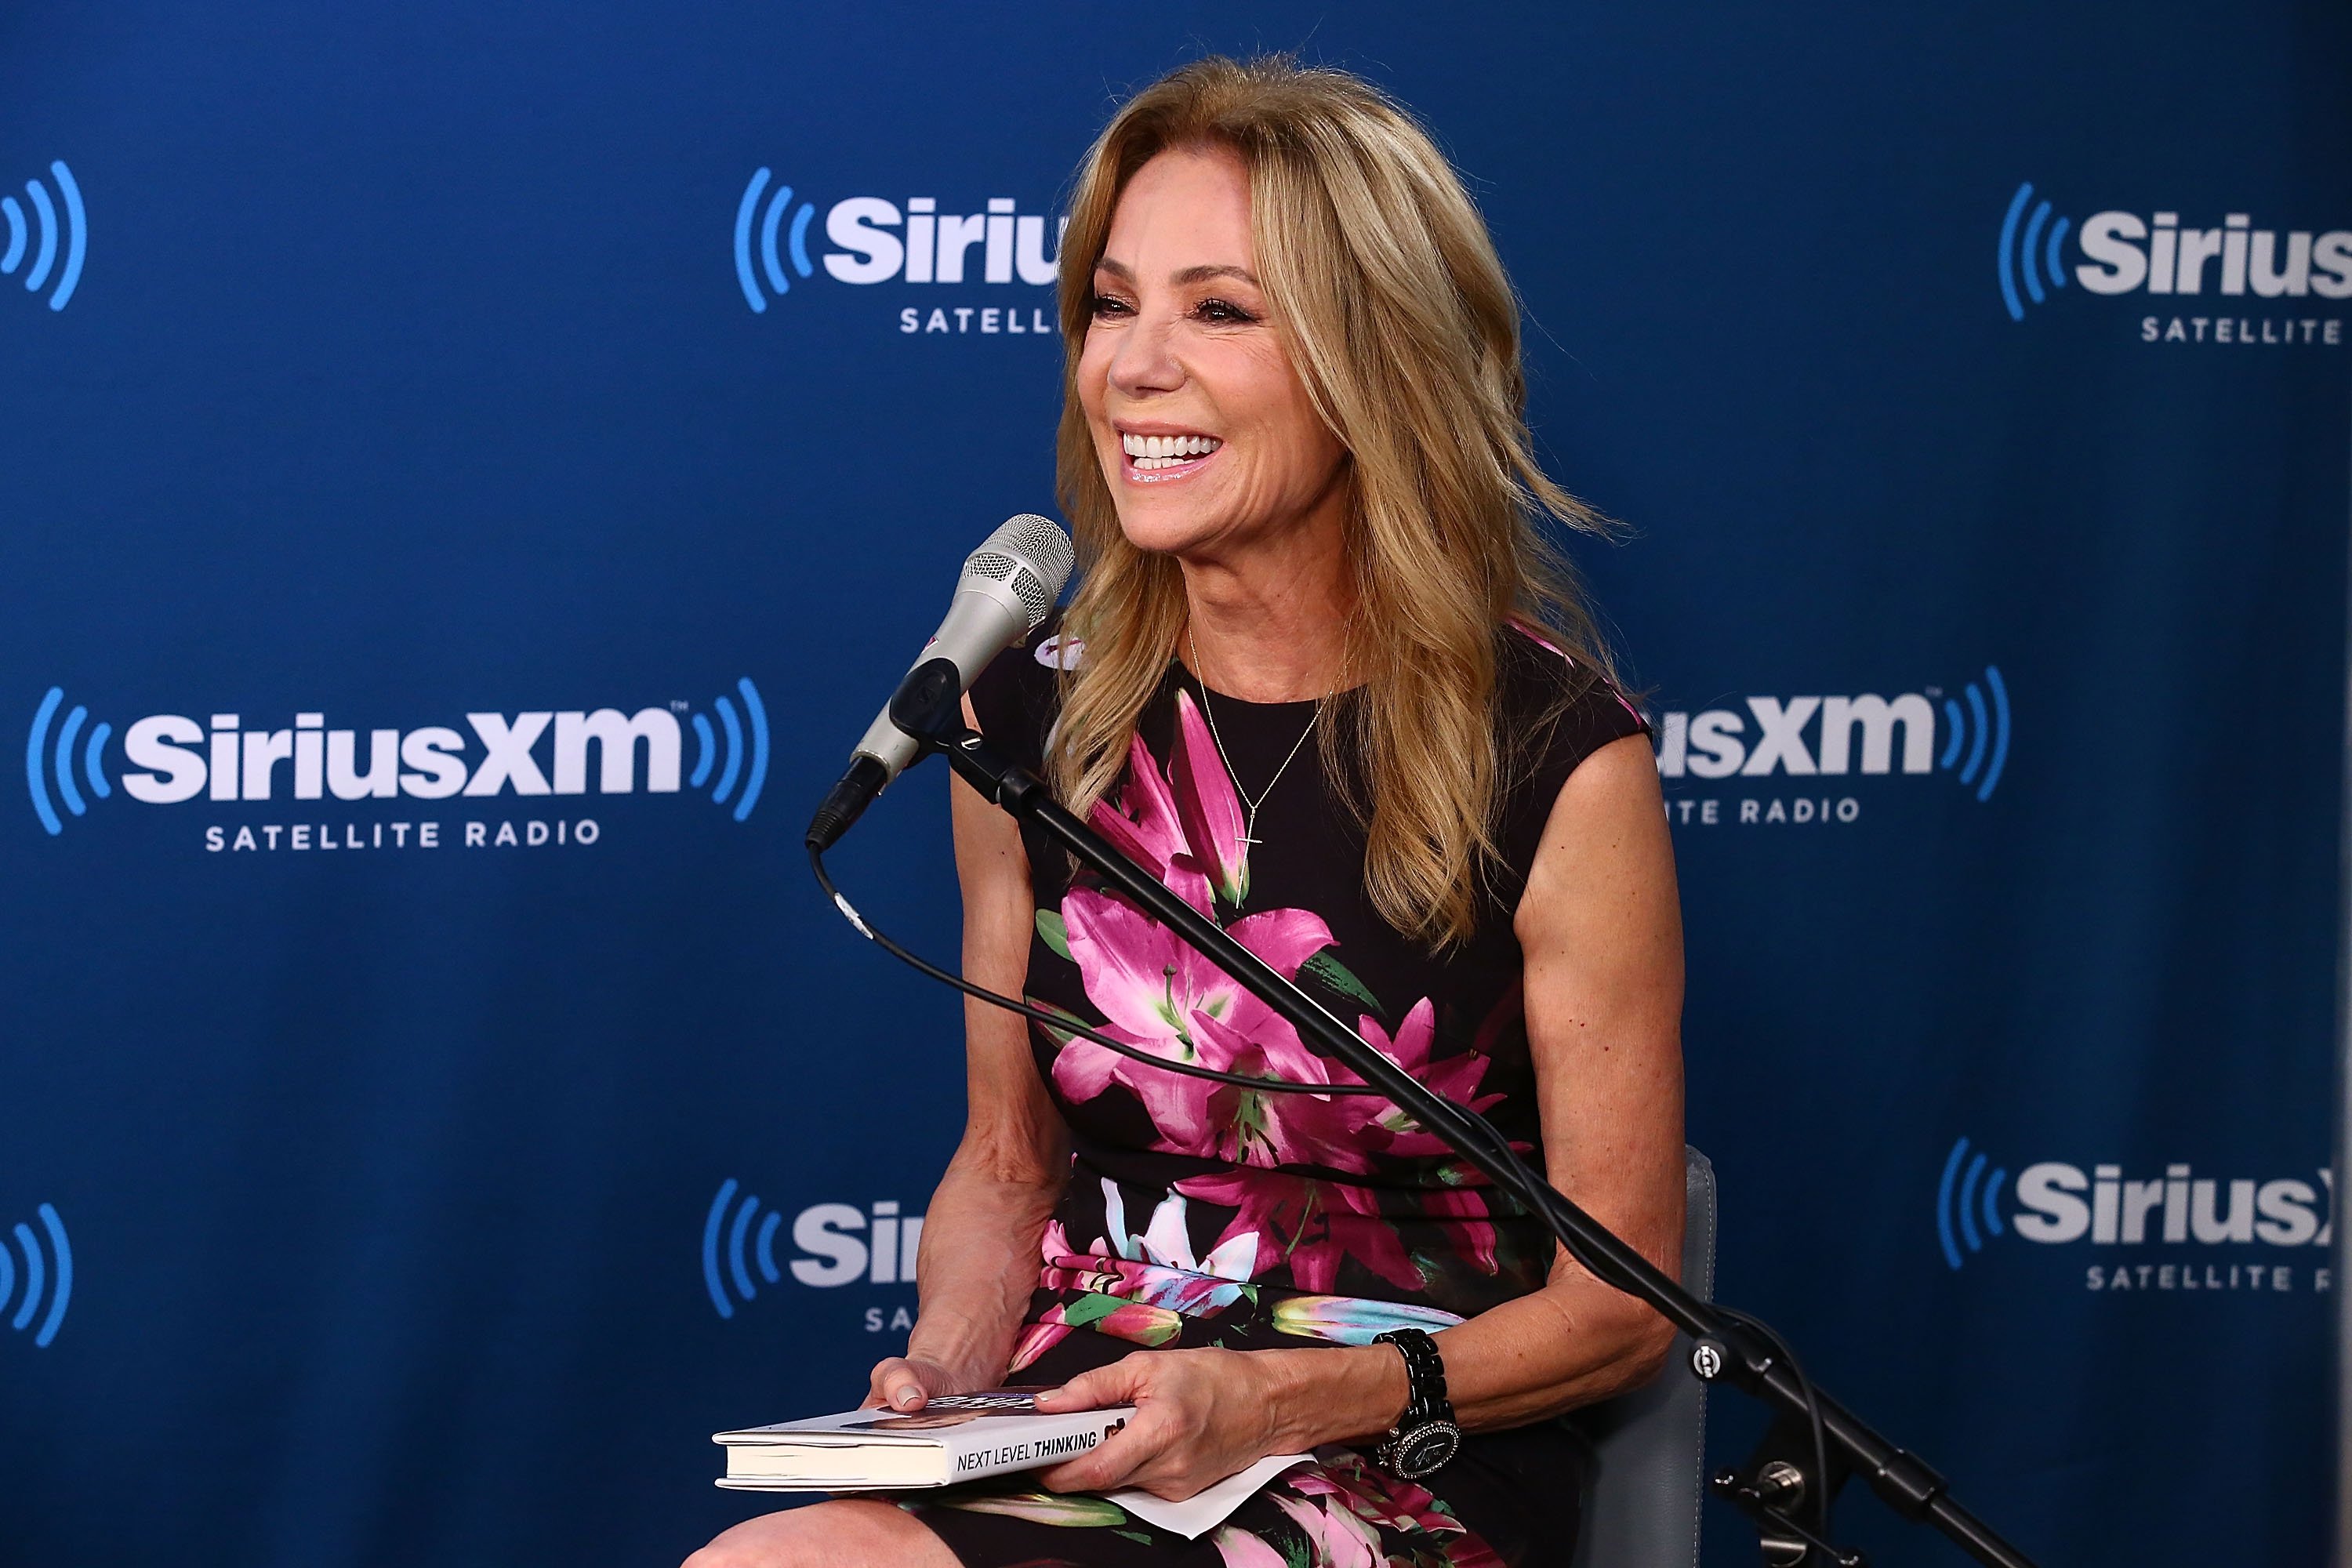 Kathie Lee Gifford speaks during the SiriusXM "Town Hall" Series with Victoria Osteen and Joel Osteen at the SiriusXM studios on October 1, 2018 | Photo: GettyImages